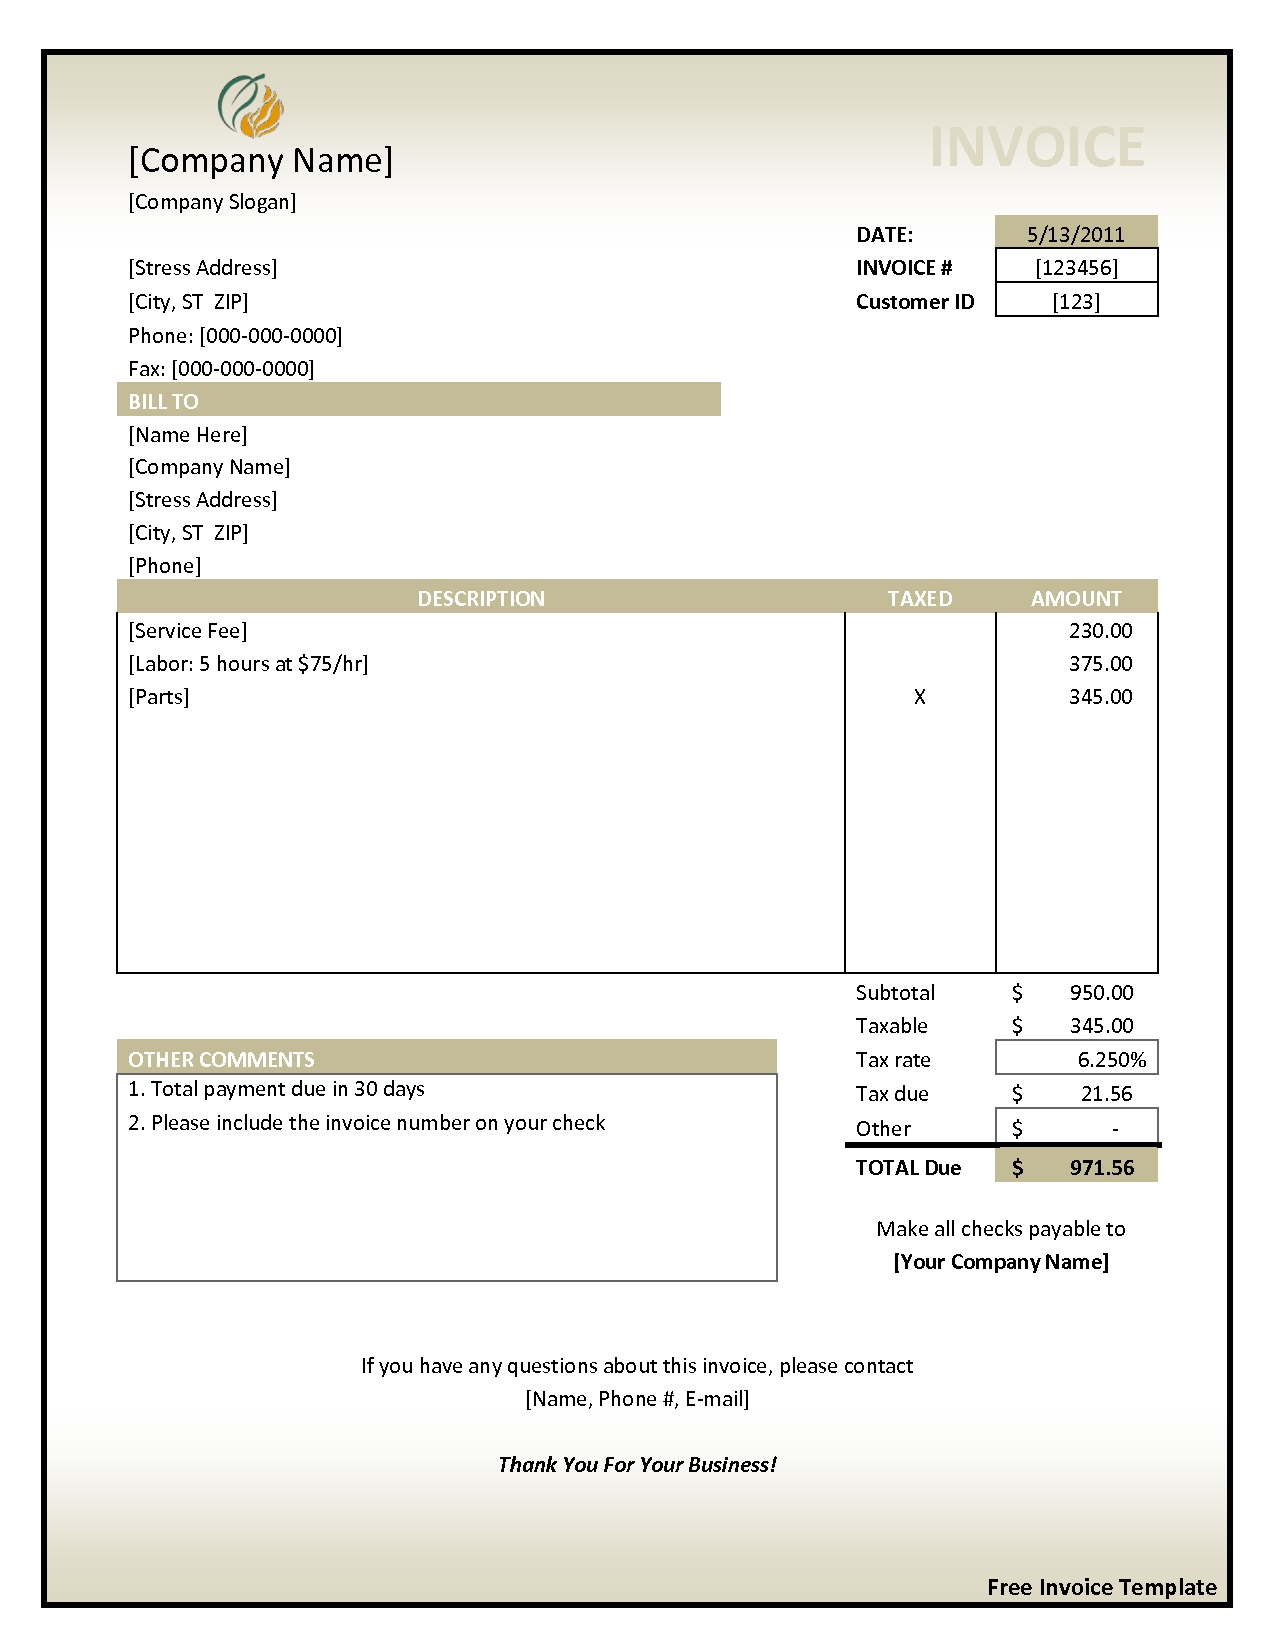 copy of invoice template free free business template free downloadable invoice templates